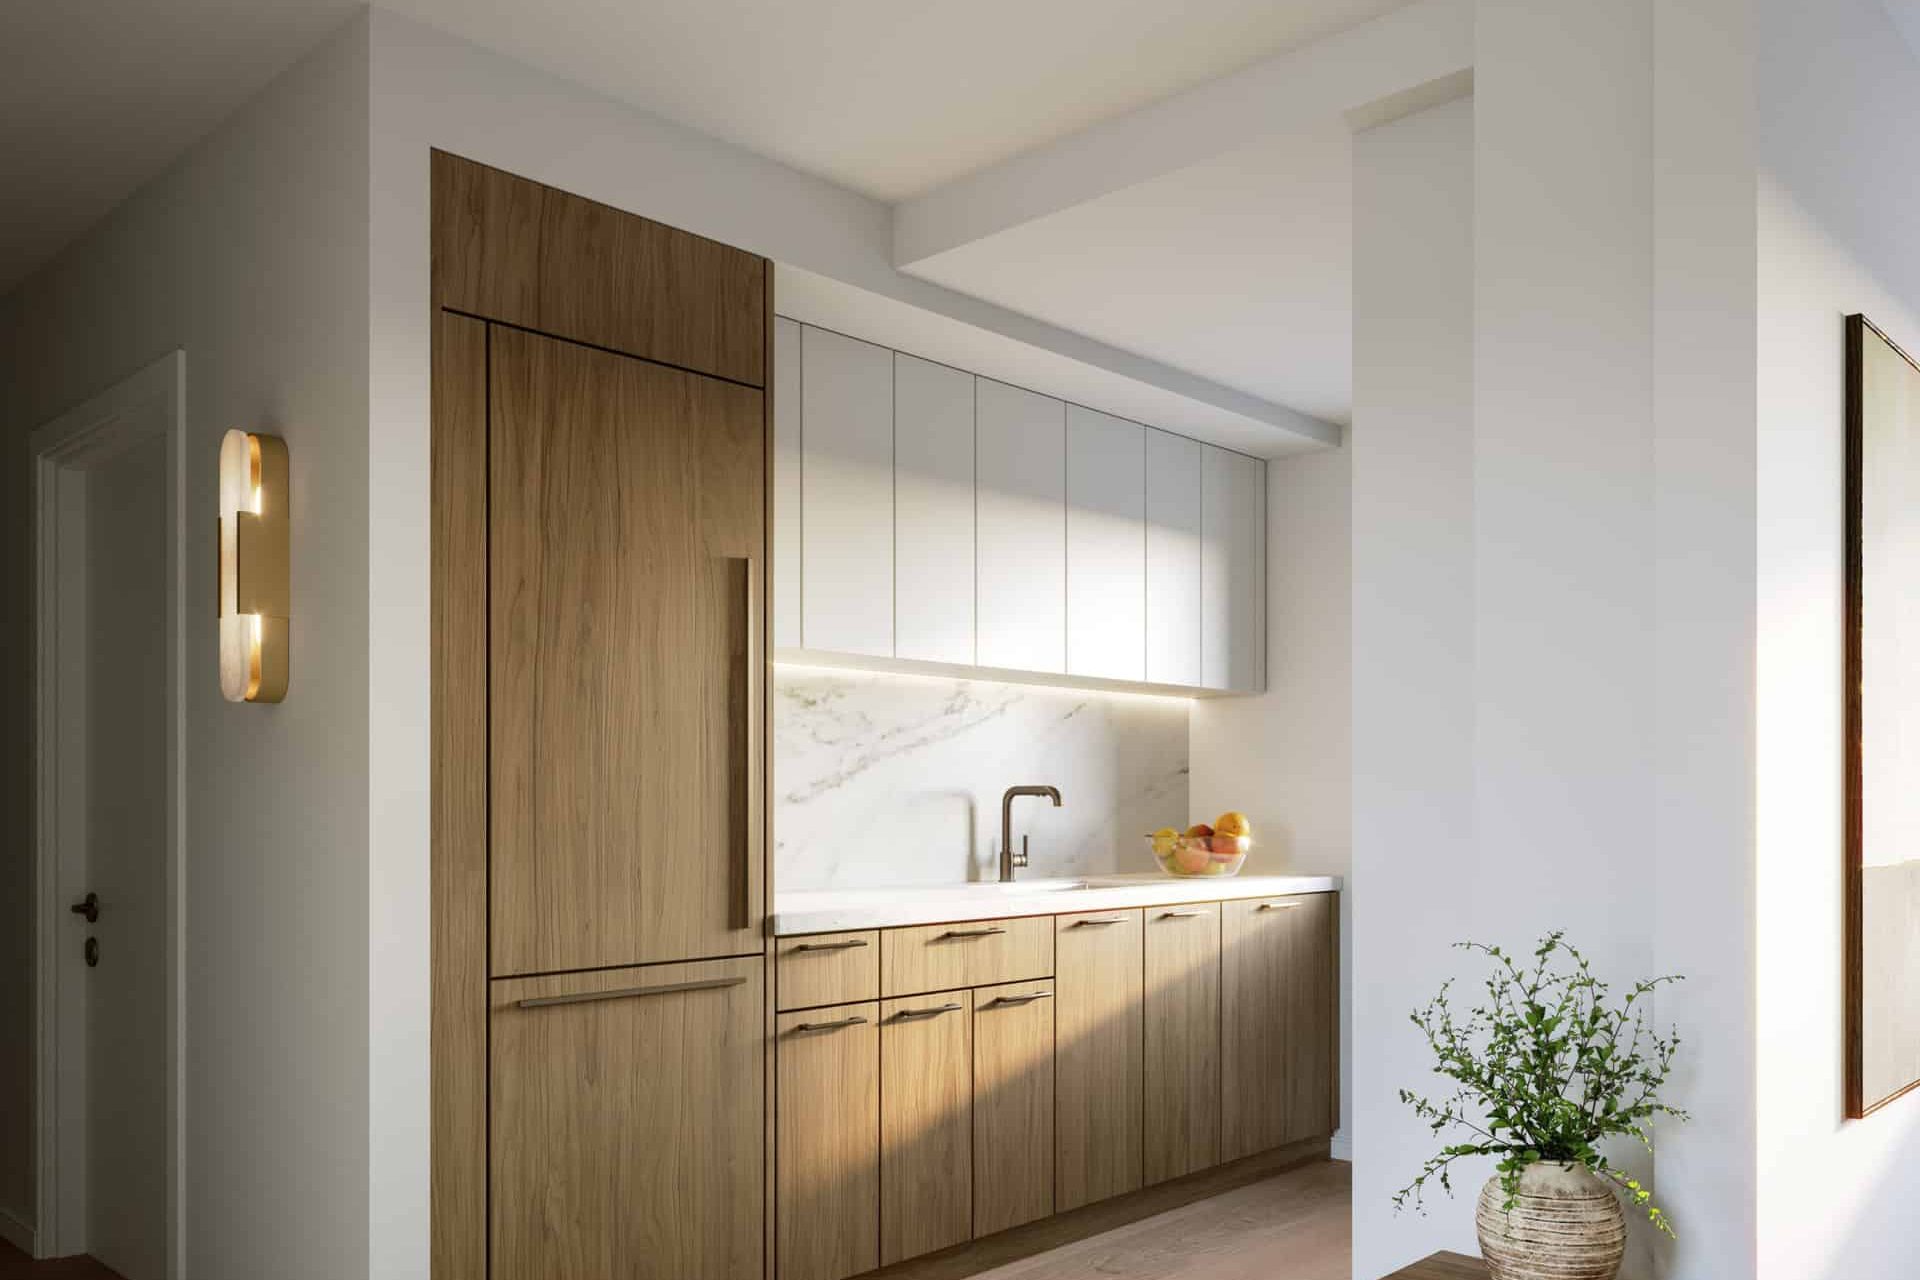 Galley kitchen at 231 East 76th Street apartments with white stone countertops, wood cabinets and hardwood floors.